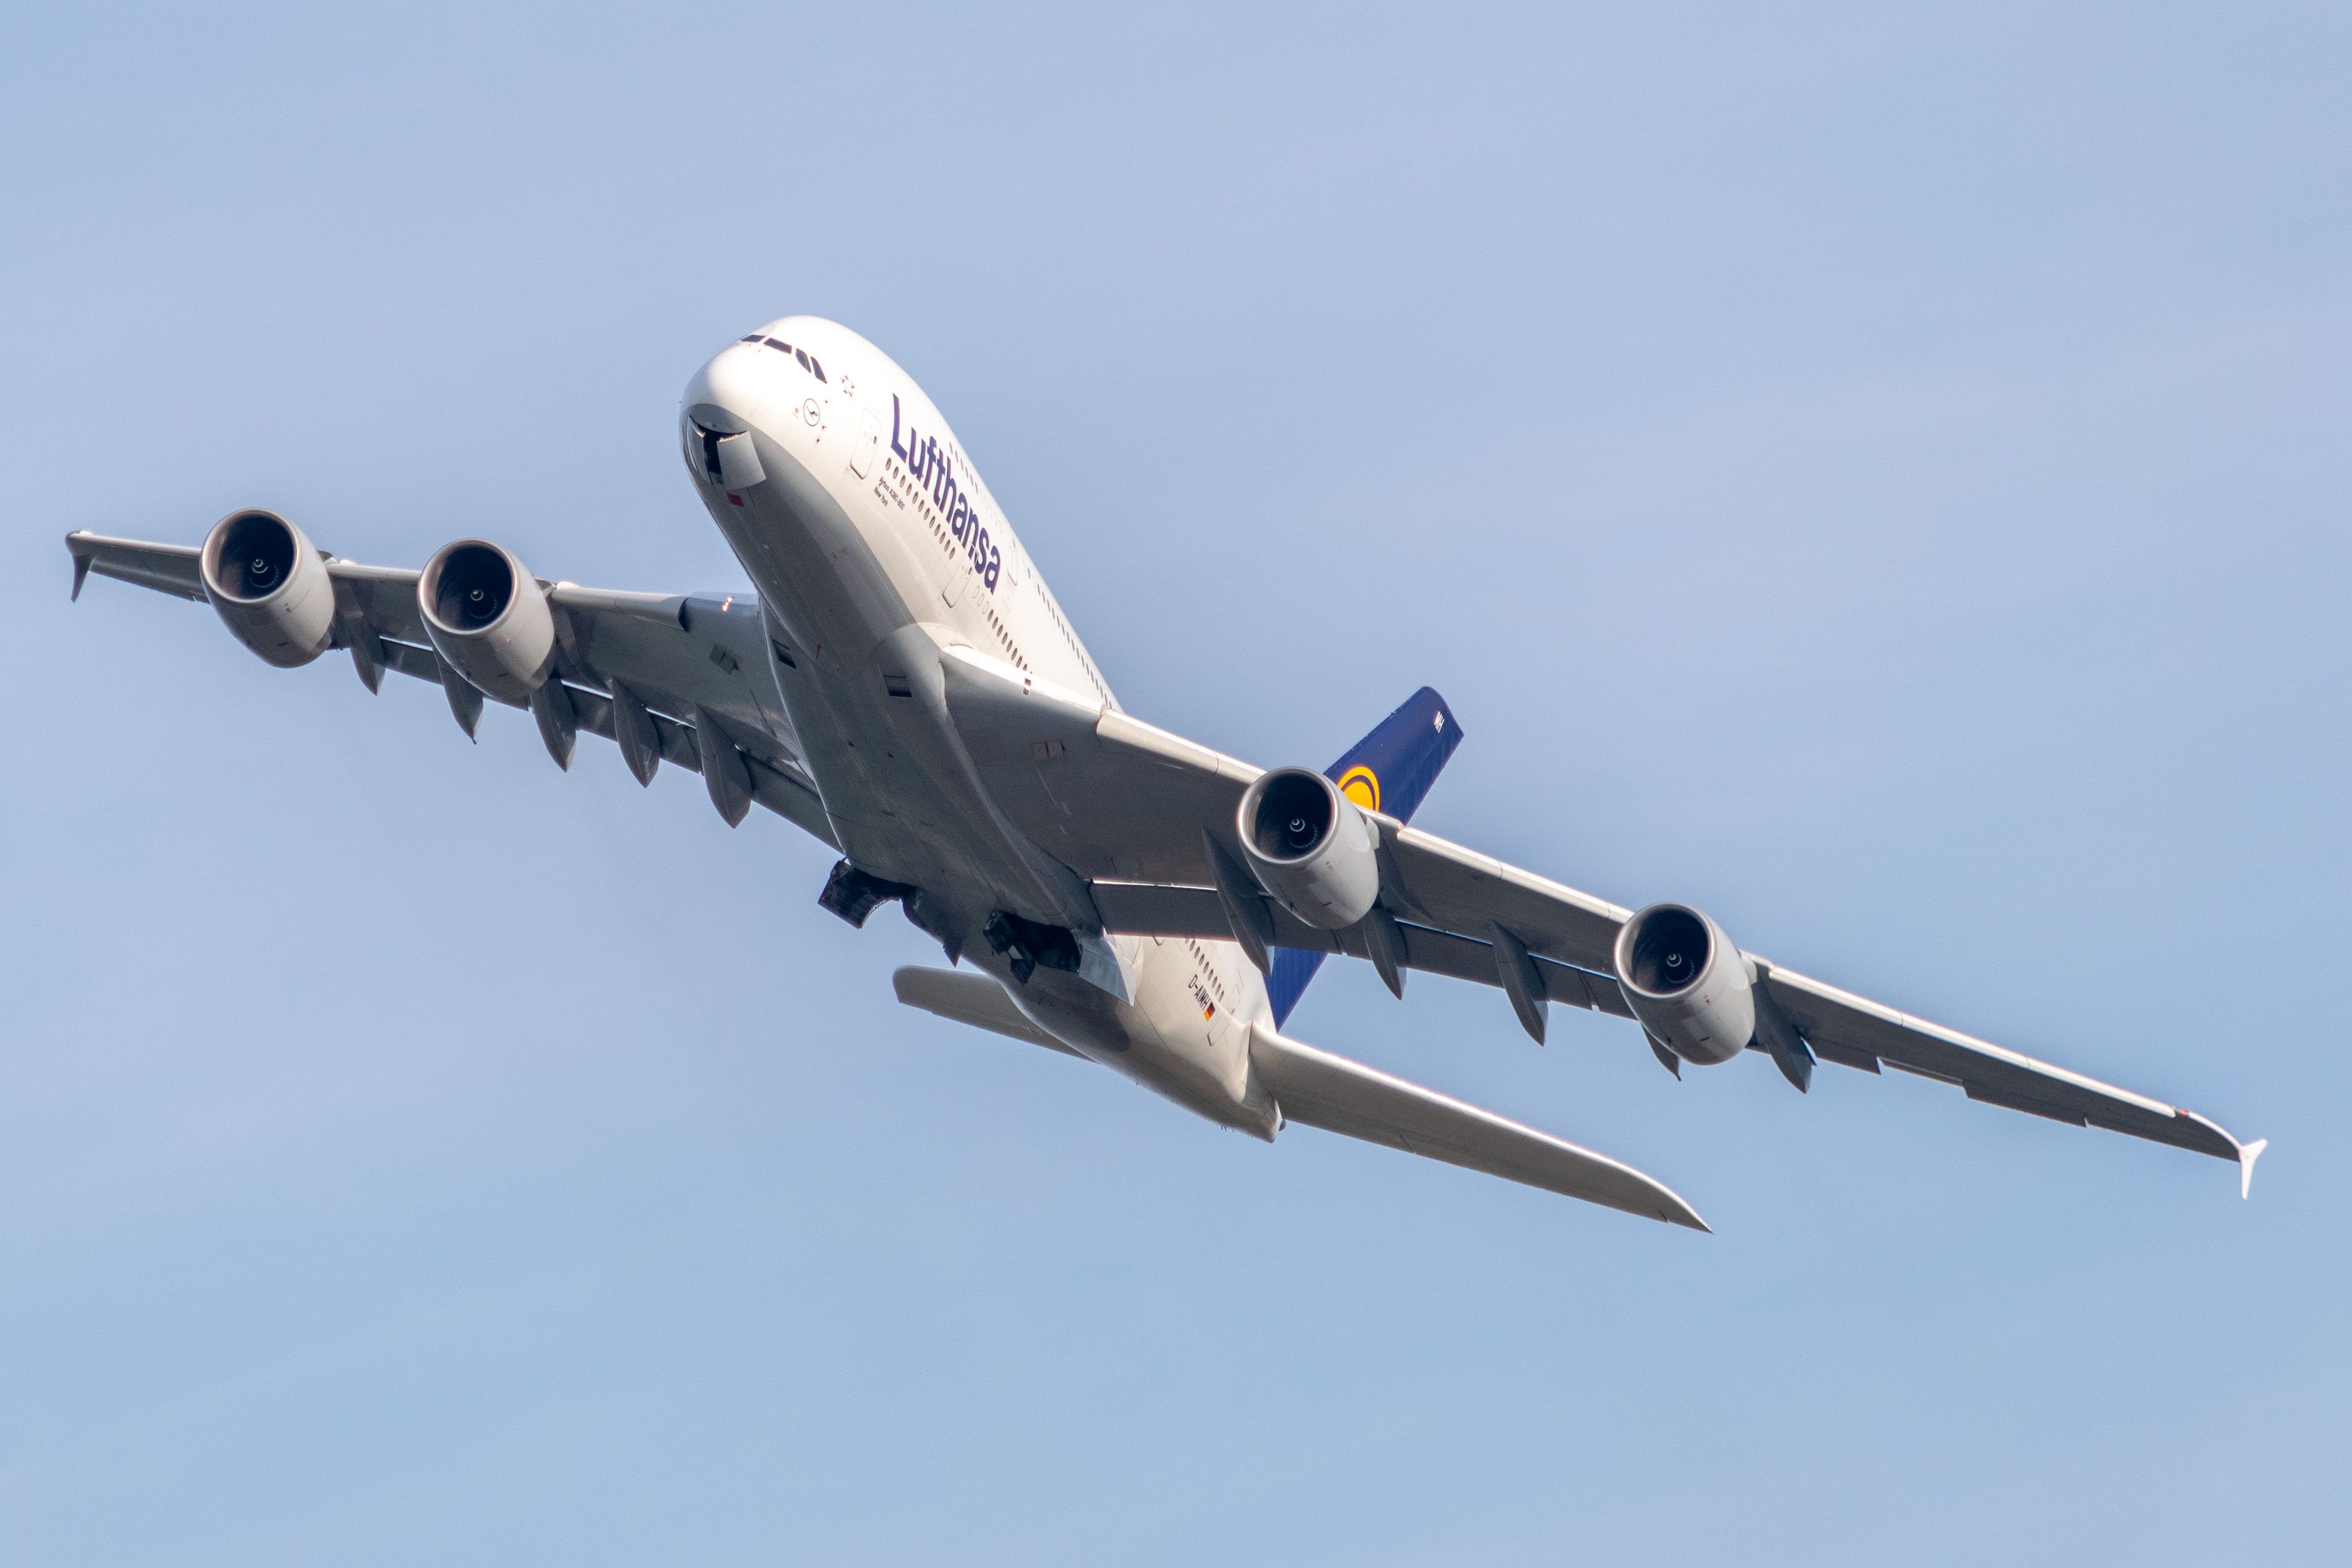 A Lufthansa Airbus A380 flying in the sky.